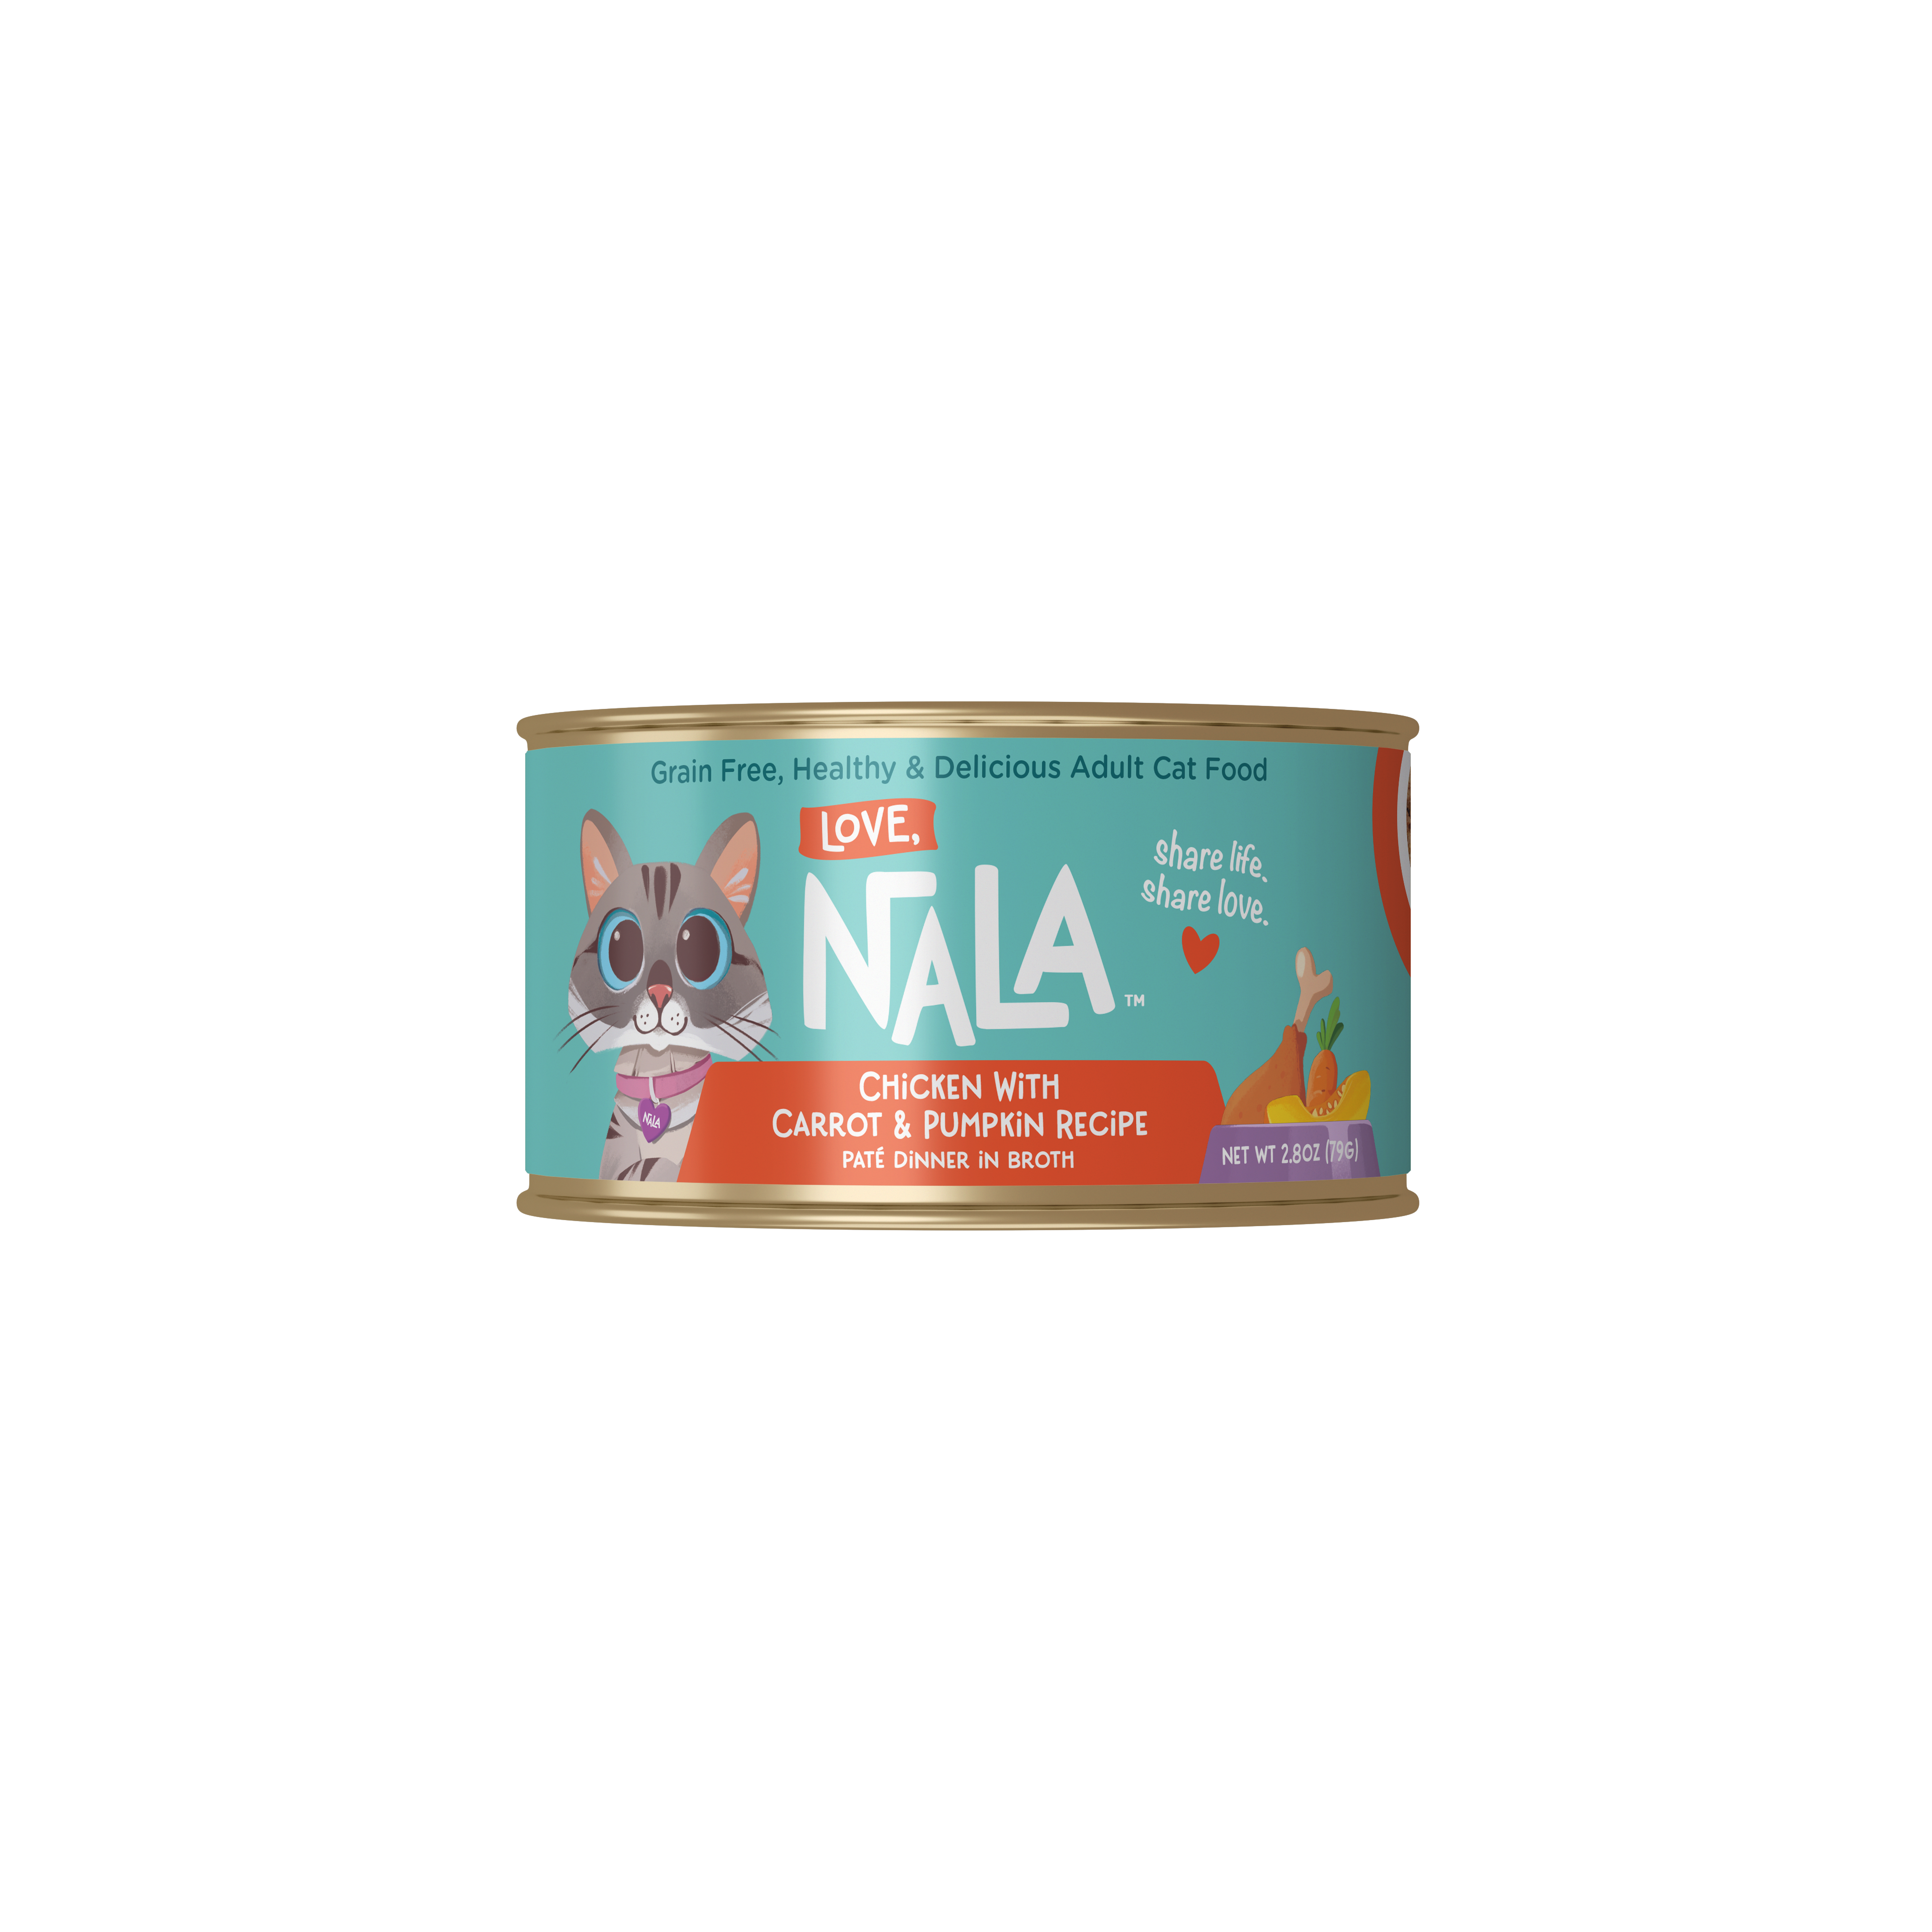 Chicken With Carrot & Pumpkin Recipe Paté Dinner In Broth Adult Cat Food, 2.8-oz, Case of 12